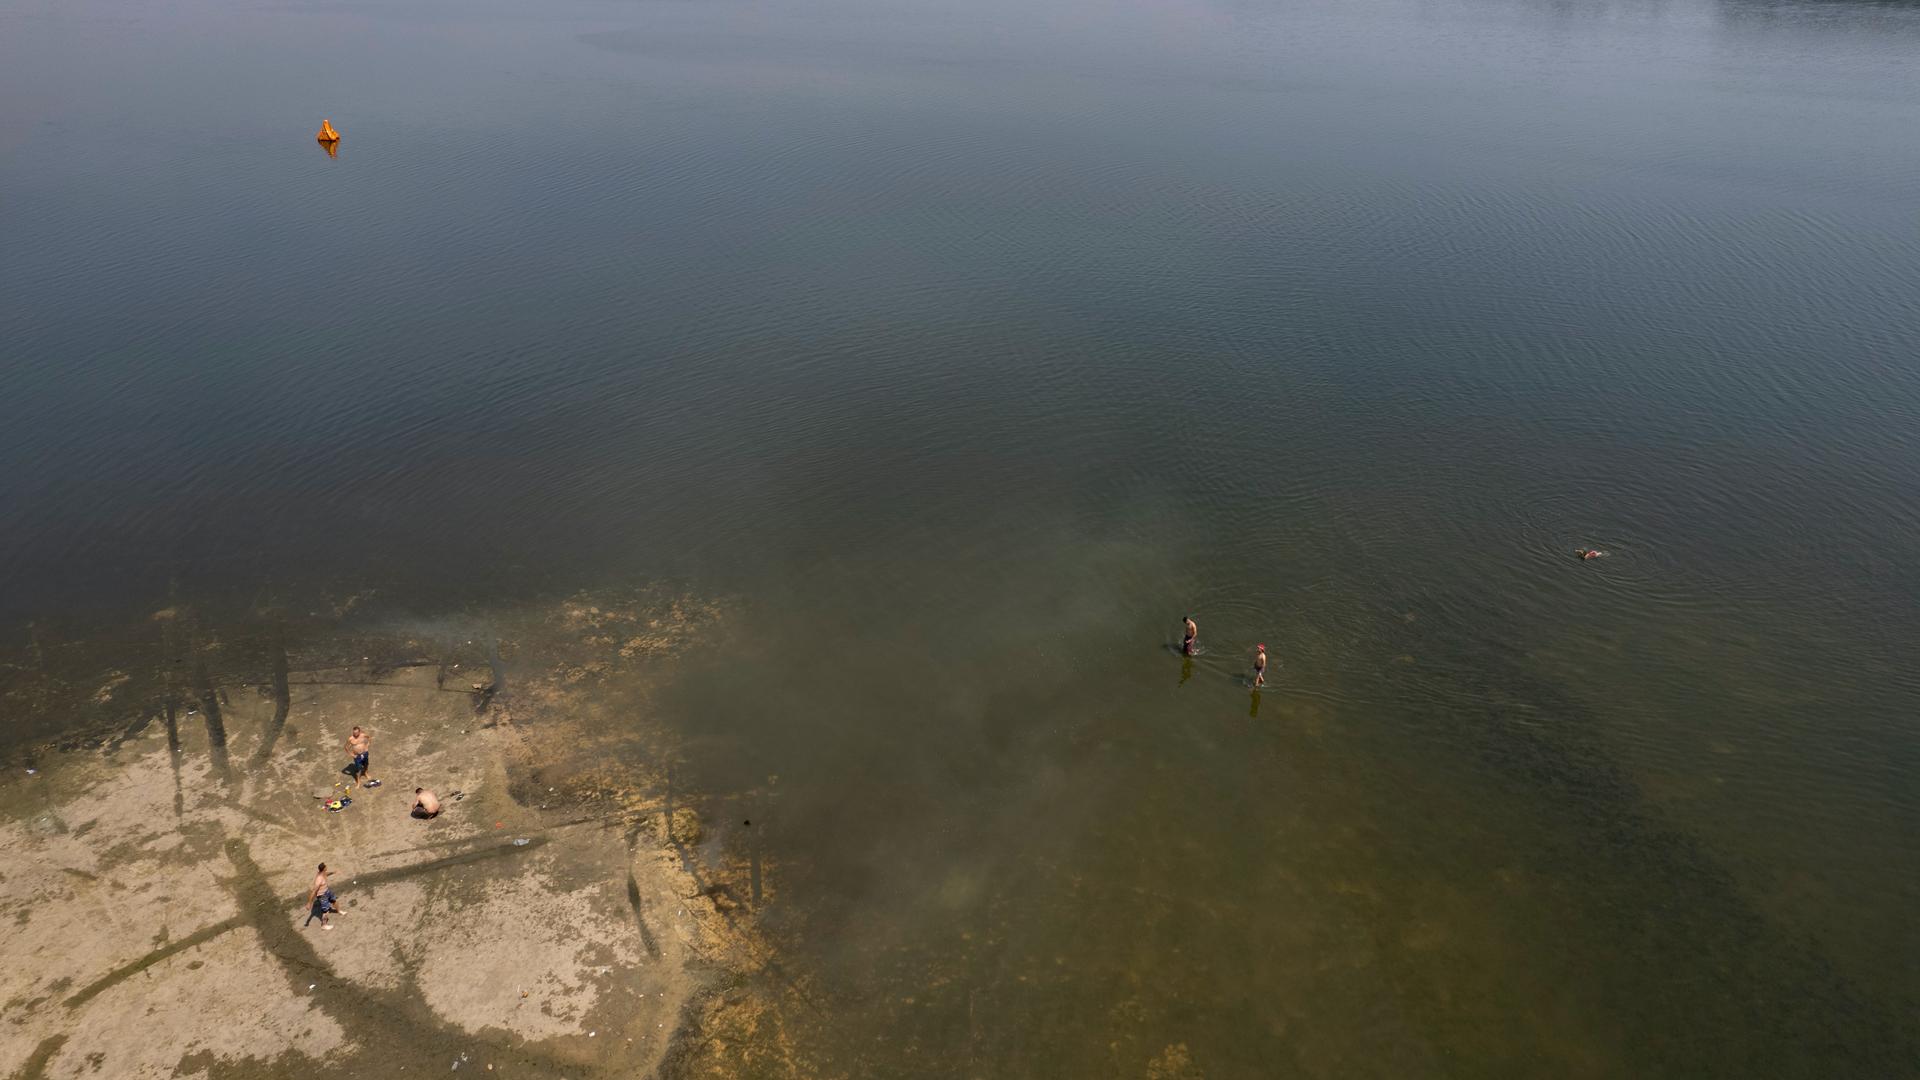 People bathe in the half-empty Guarapiranga Reservoir which provides water to the São Paulo metropolitan area, in Brazil, Sept. 20, 2021. Water levels have plunged during the ongoing dry season, bringing concerns about the water supply to São Paulo, the l